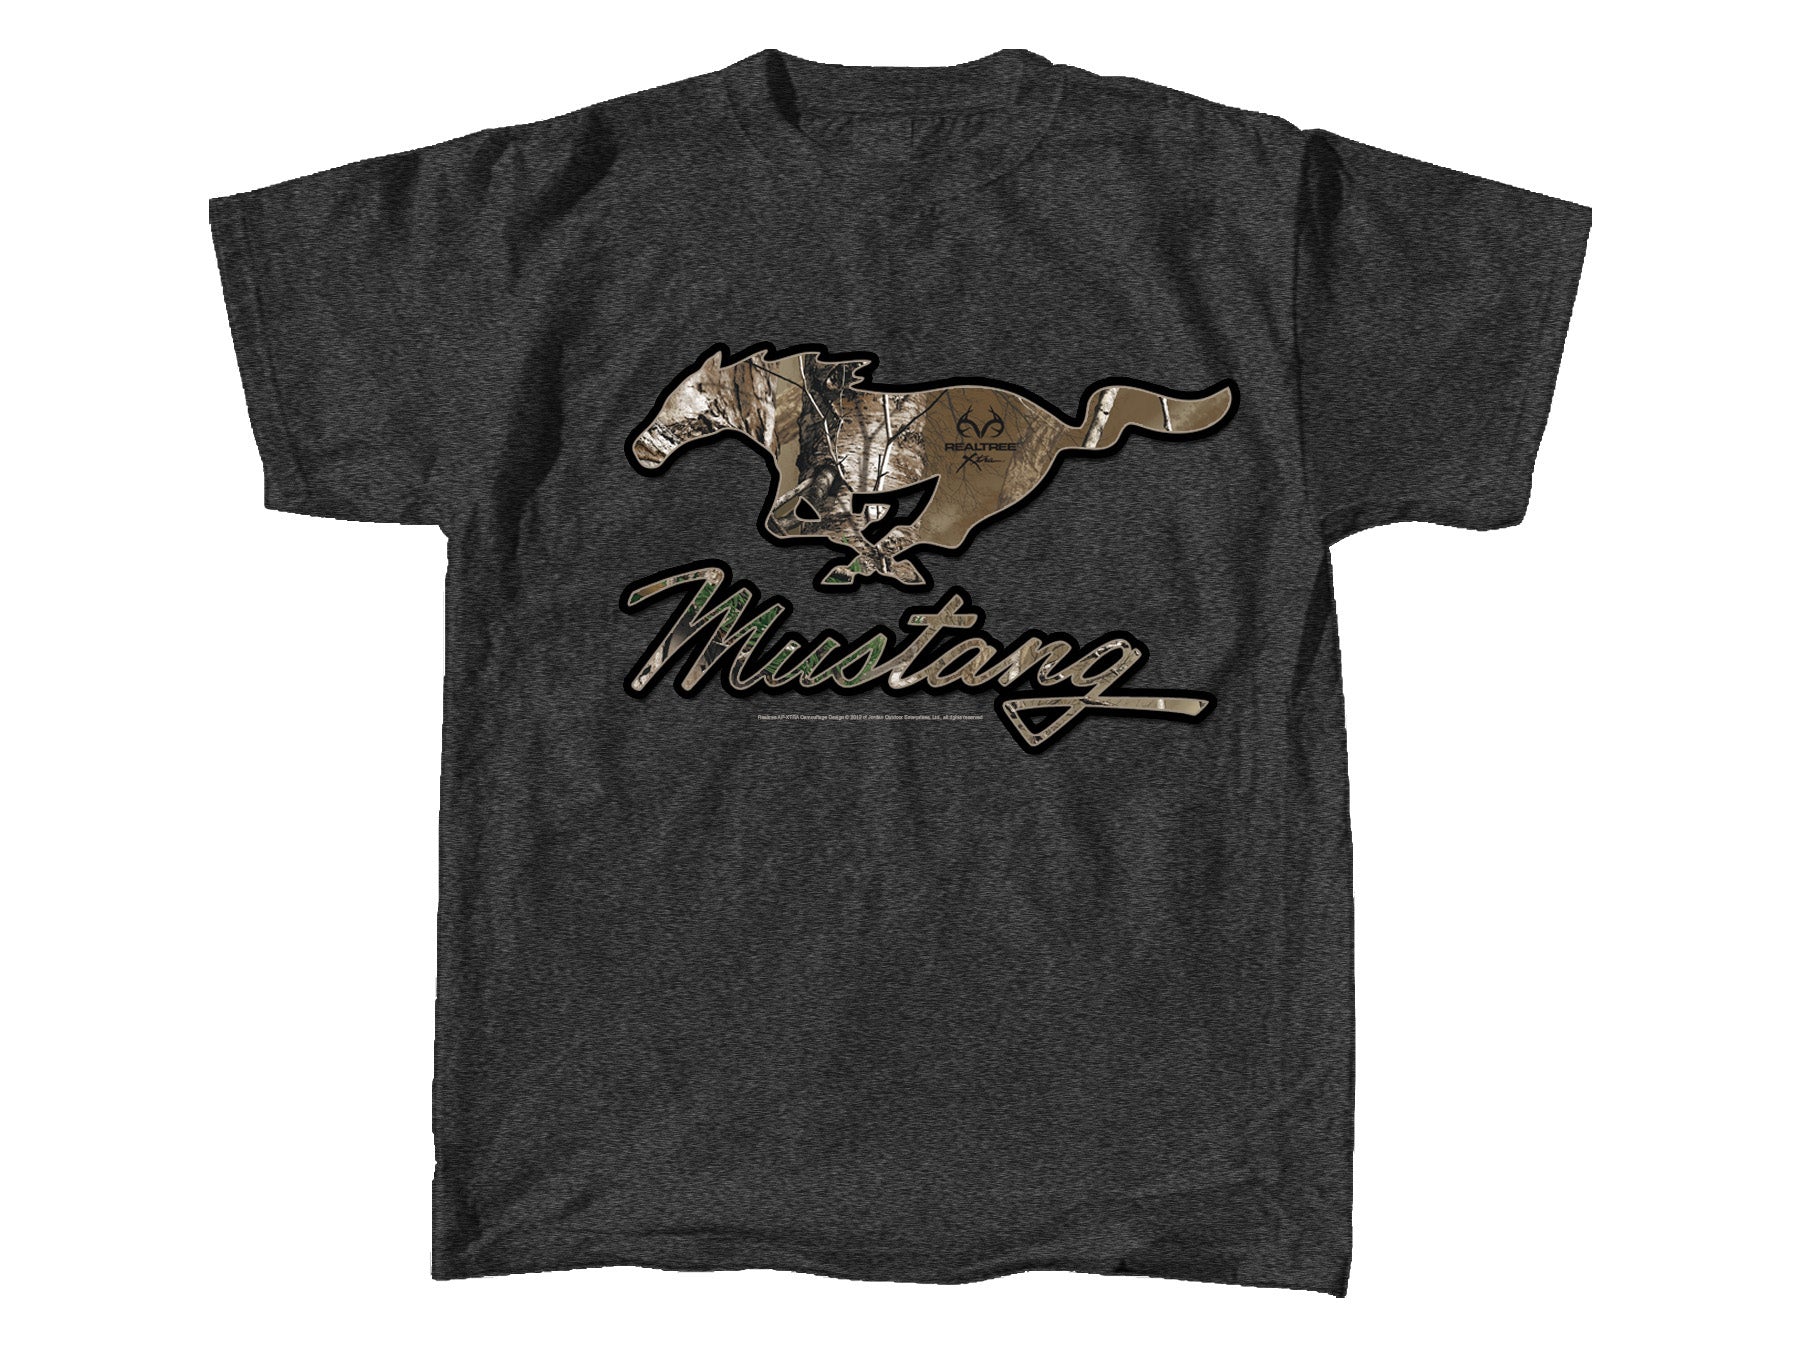 Ford Mustang Realtree Camo Running Horse Pony Gray Graphic T-Shirt Mens Large